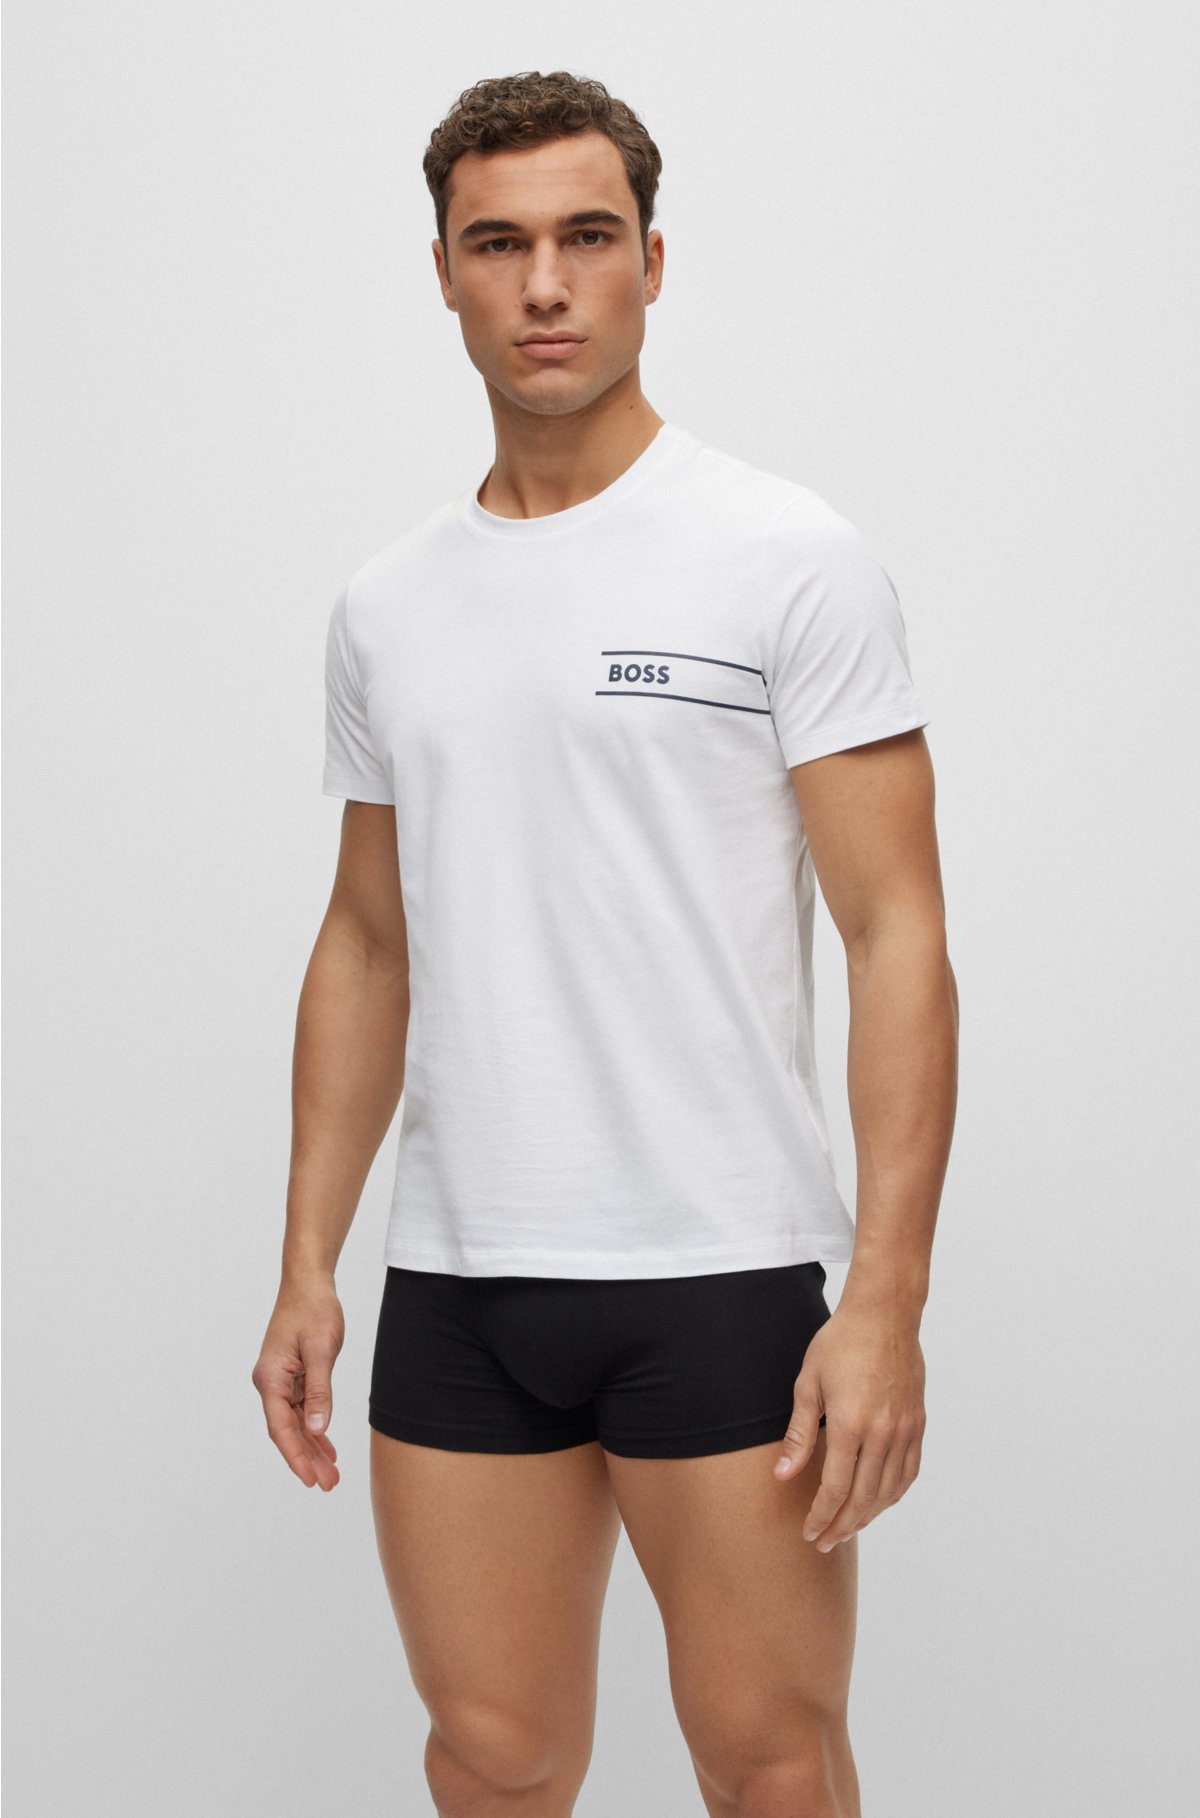 BOSS - Cotton underwear T-shirt with stripes and logo